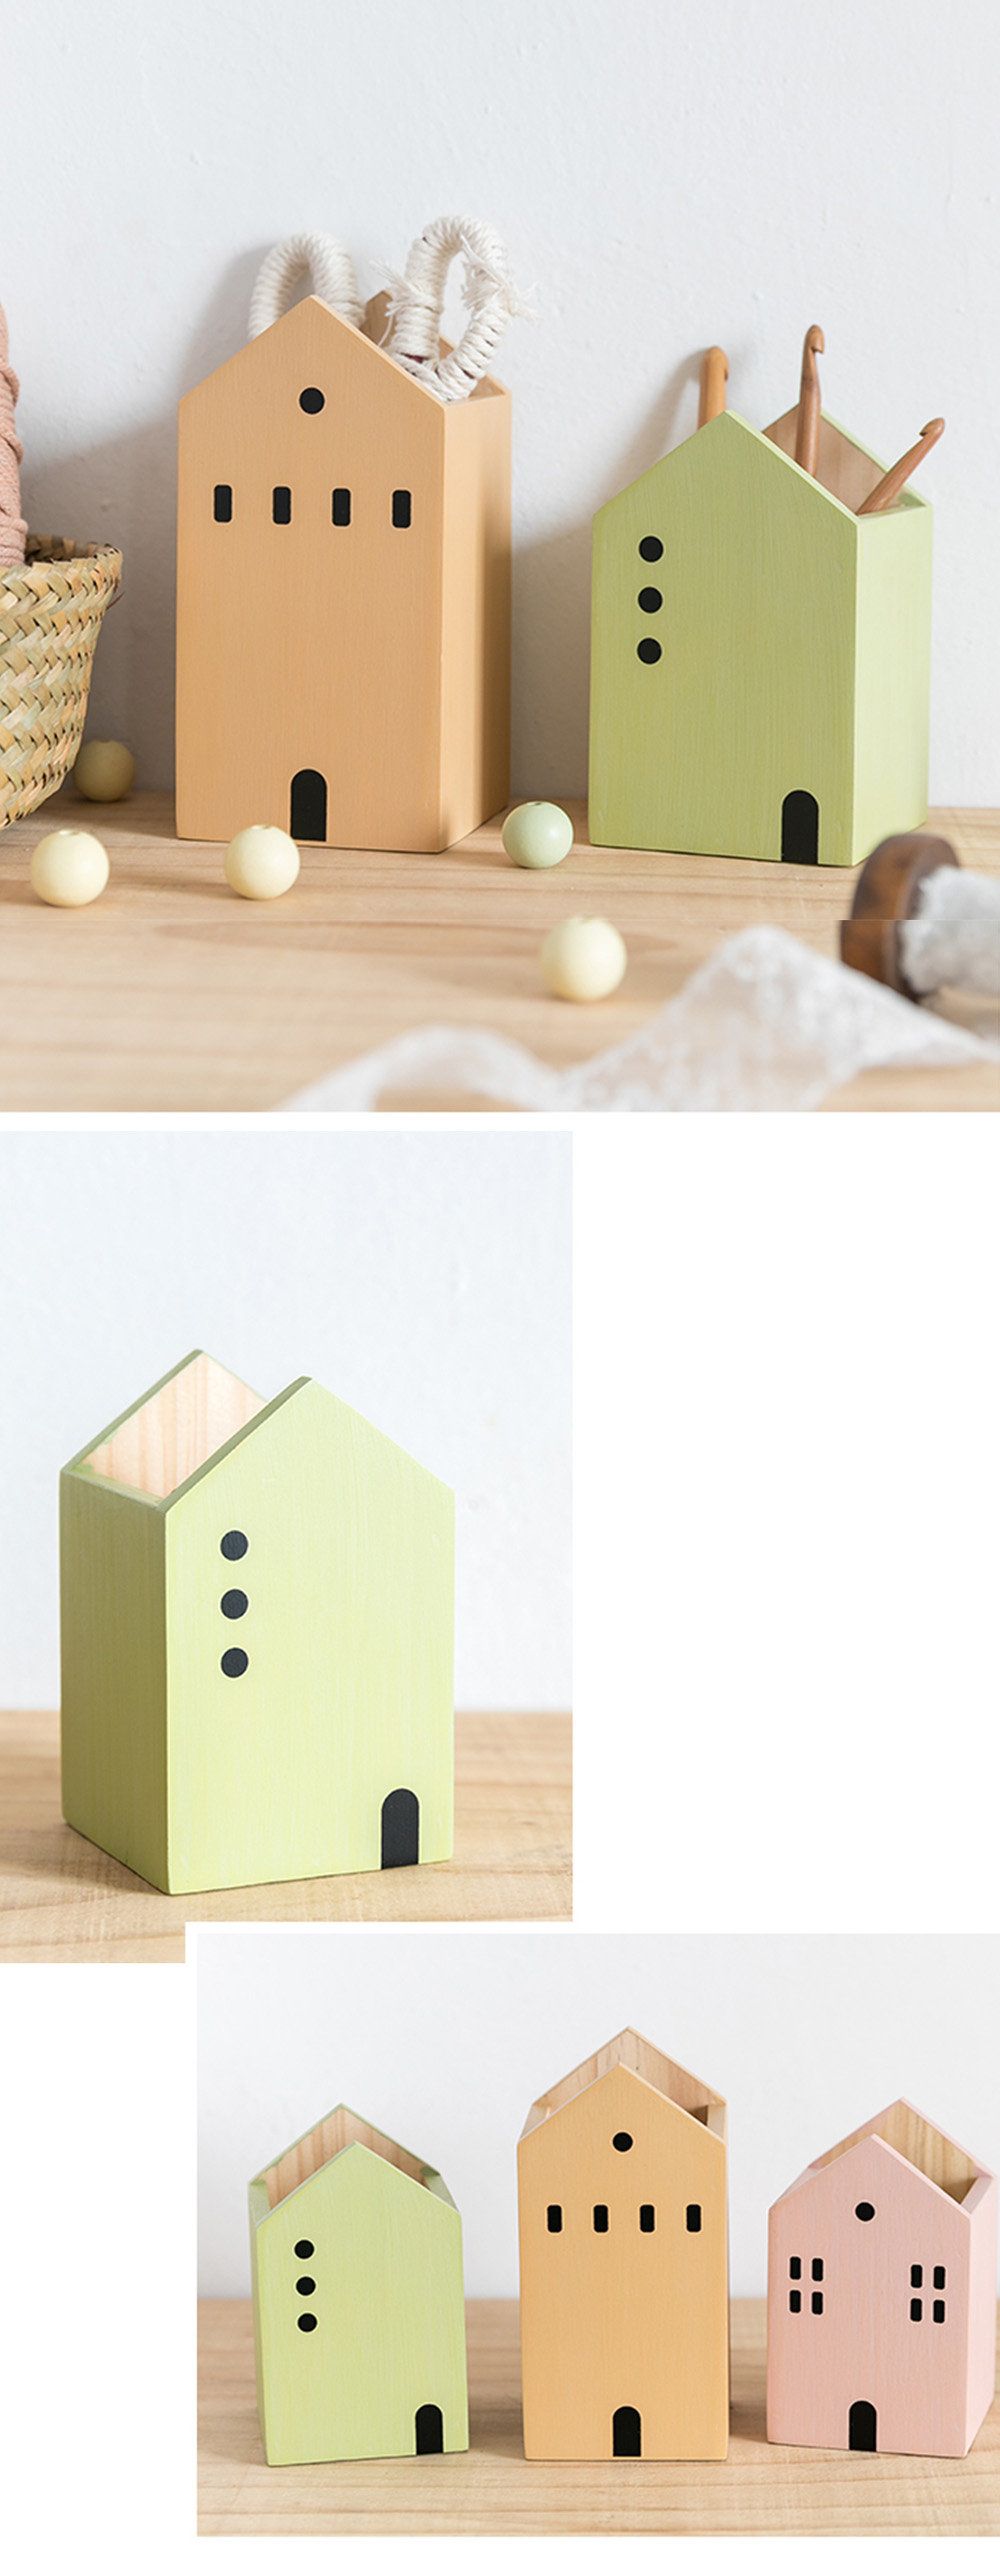 Cute House Pencil Holder - Wood - 5 Patterns from Apollo Box